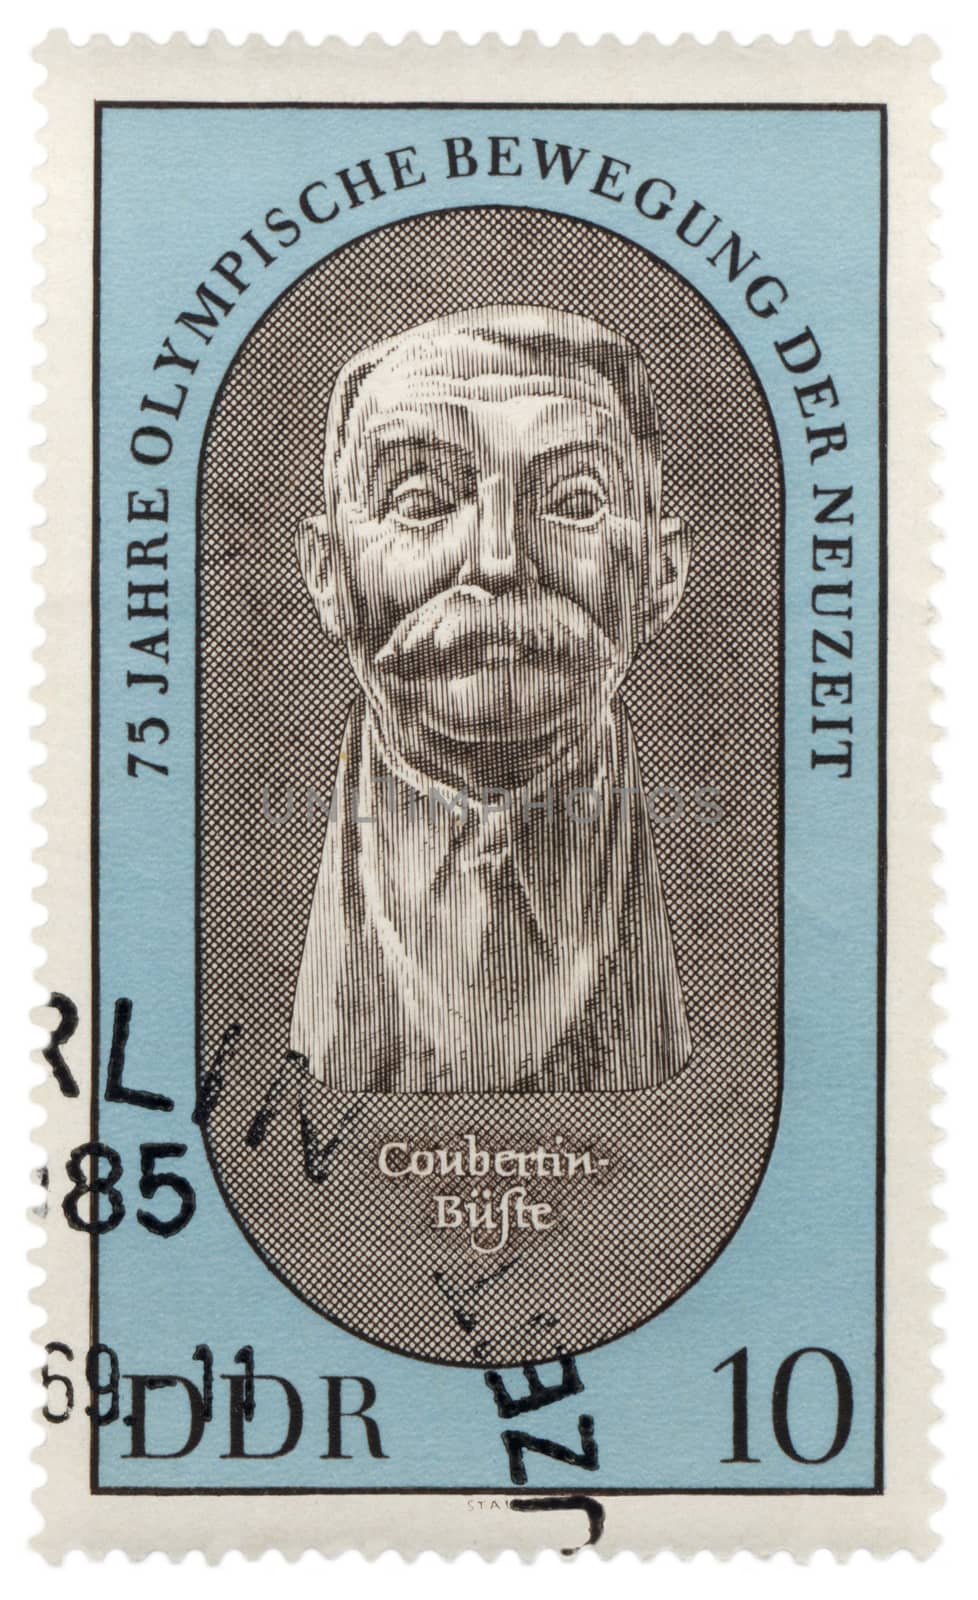 GDR - CIRCA 1970: A stamp printed in GDR (East Germany) shows portrait of Pierre de Coubertin, founder of modern Olympic Games, series, circa 1970